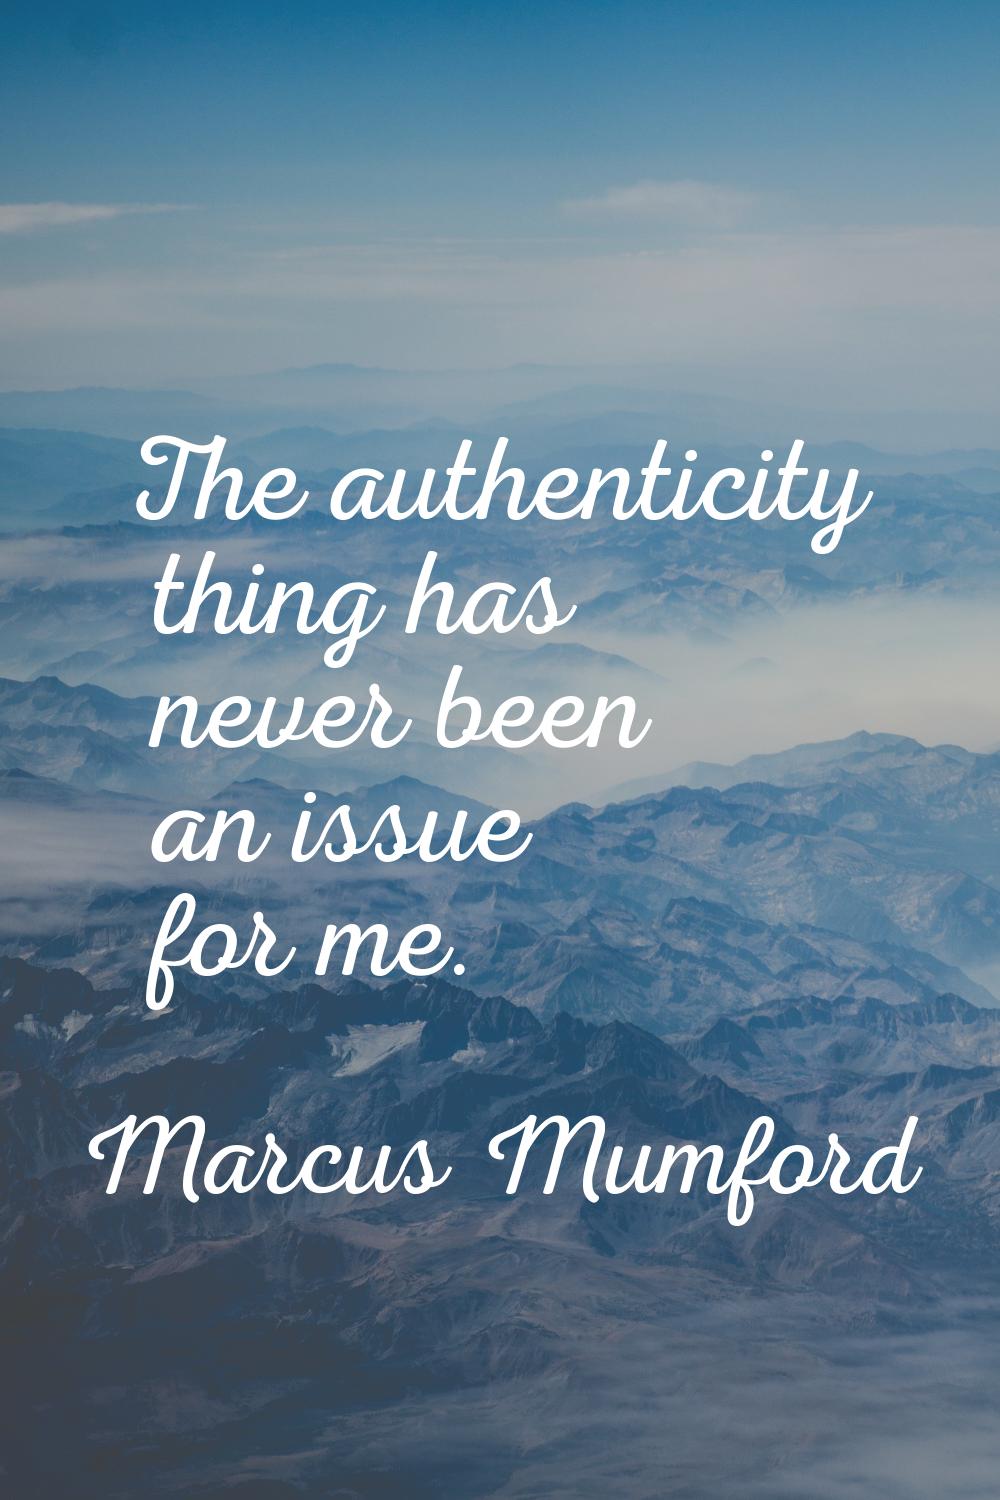 The authenticity thing has never been an issue for me.